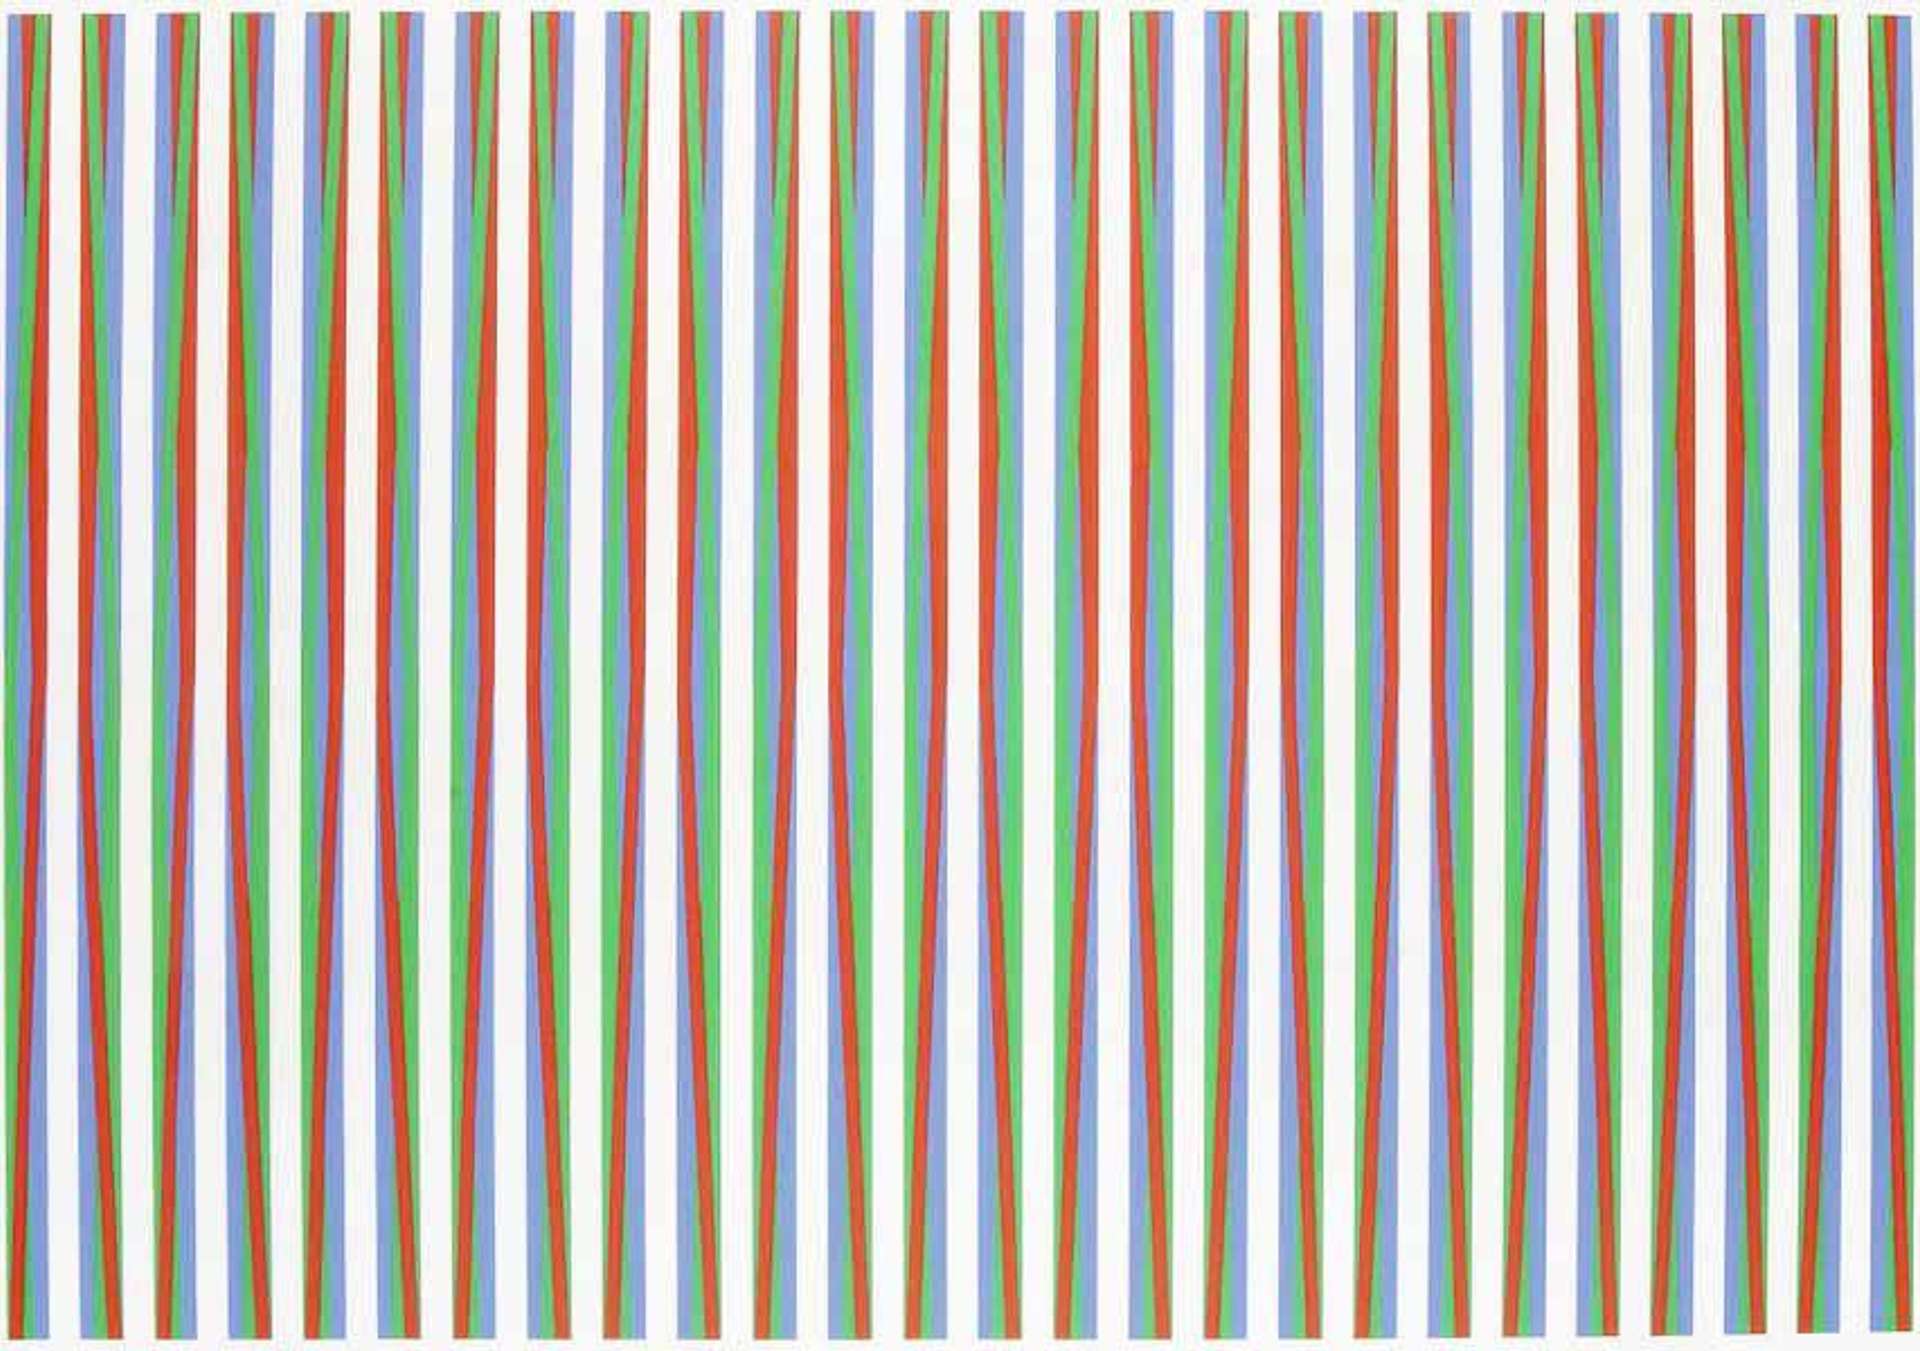 Print displaying vertical, twisting bars of red, green and blue, separated by intervals of white space, in turn generate a powerful and spirited array of imagined colours for the viewer. 